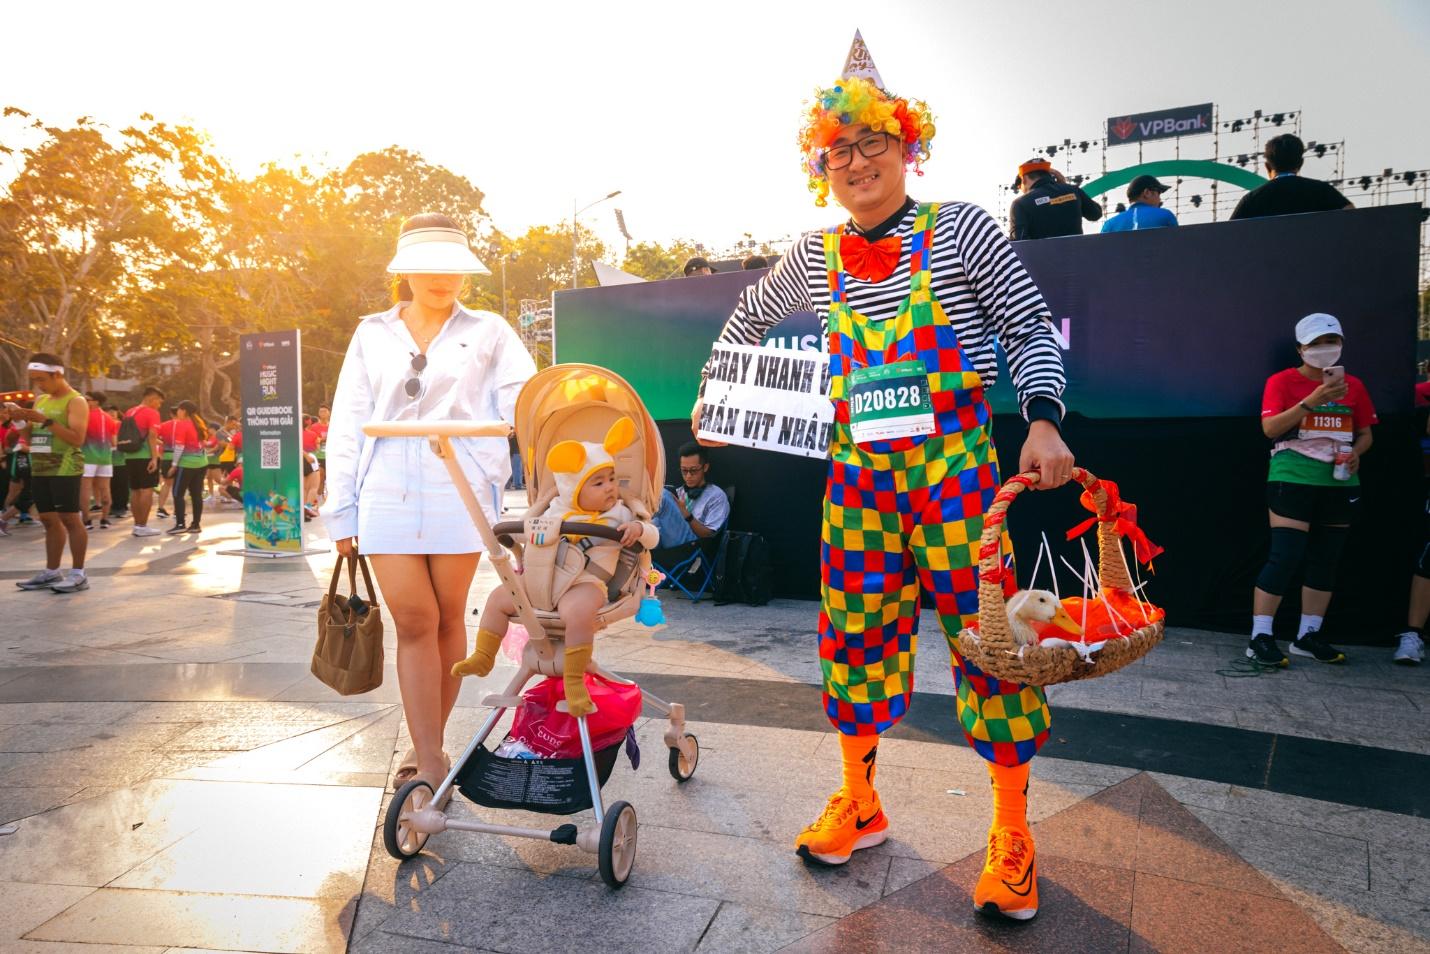 A person in clown garment with a baby stroller and a person in a white coat

Description automatically generated